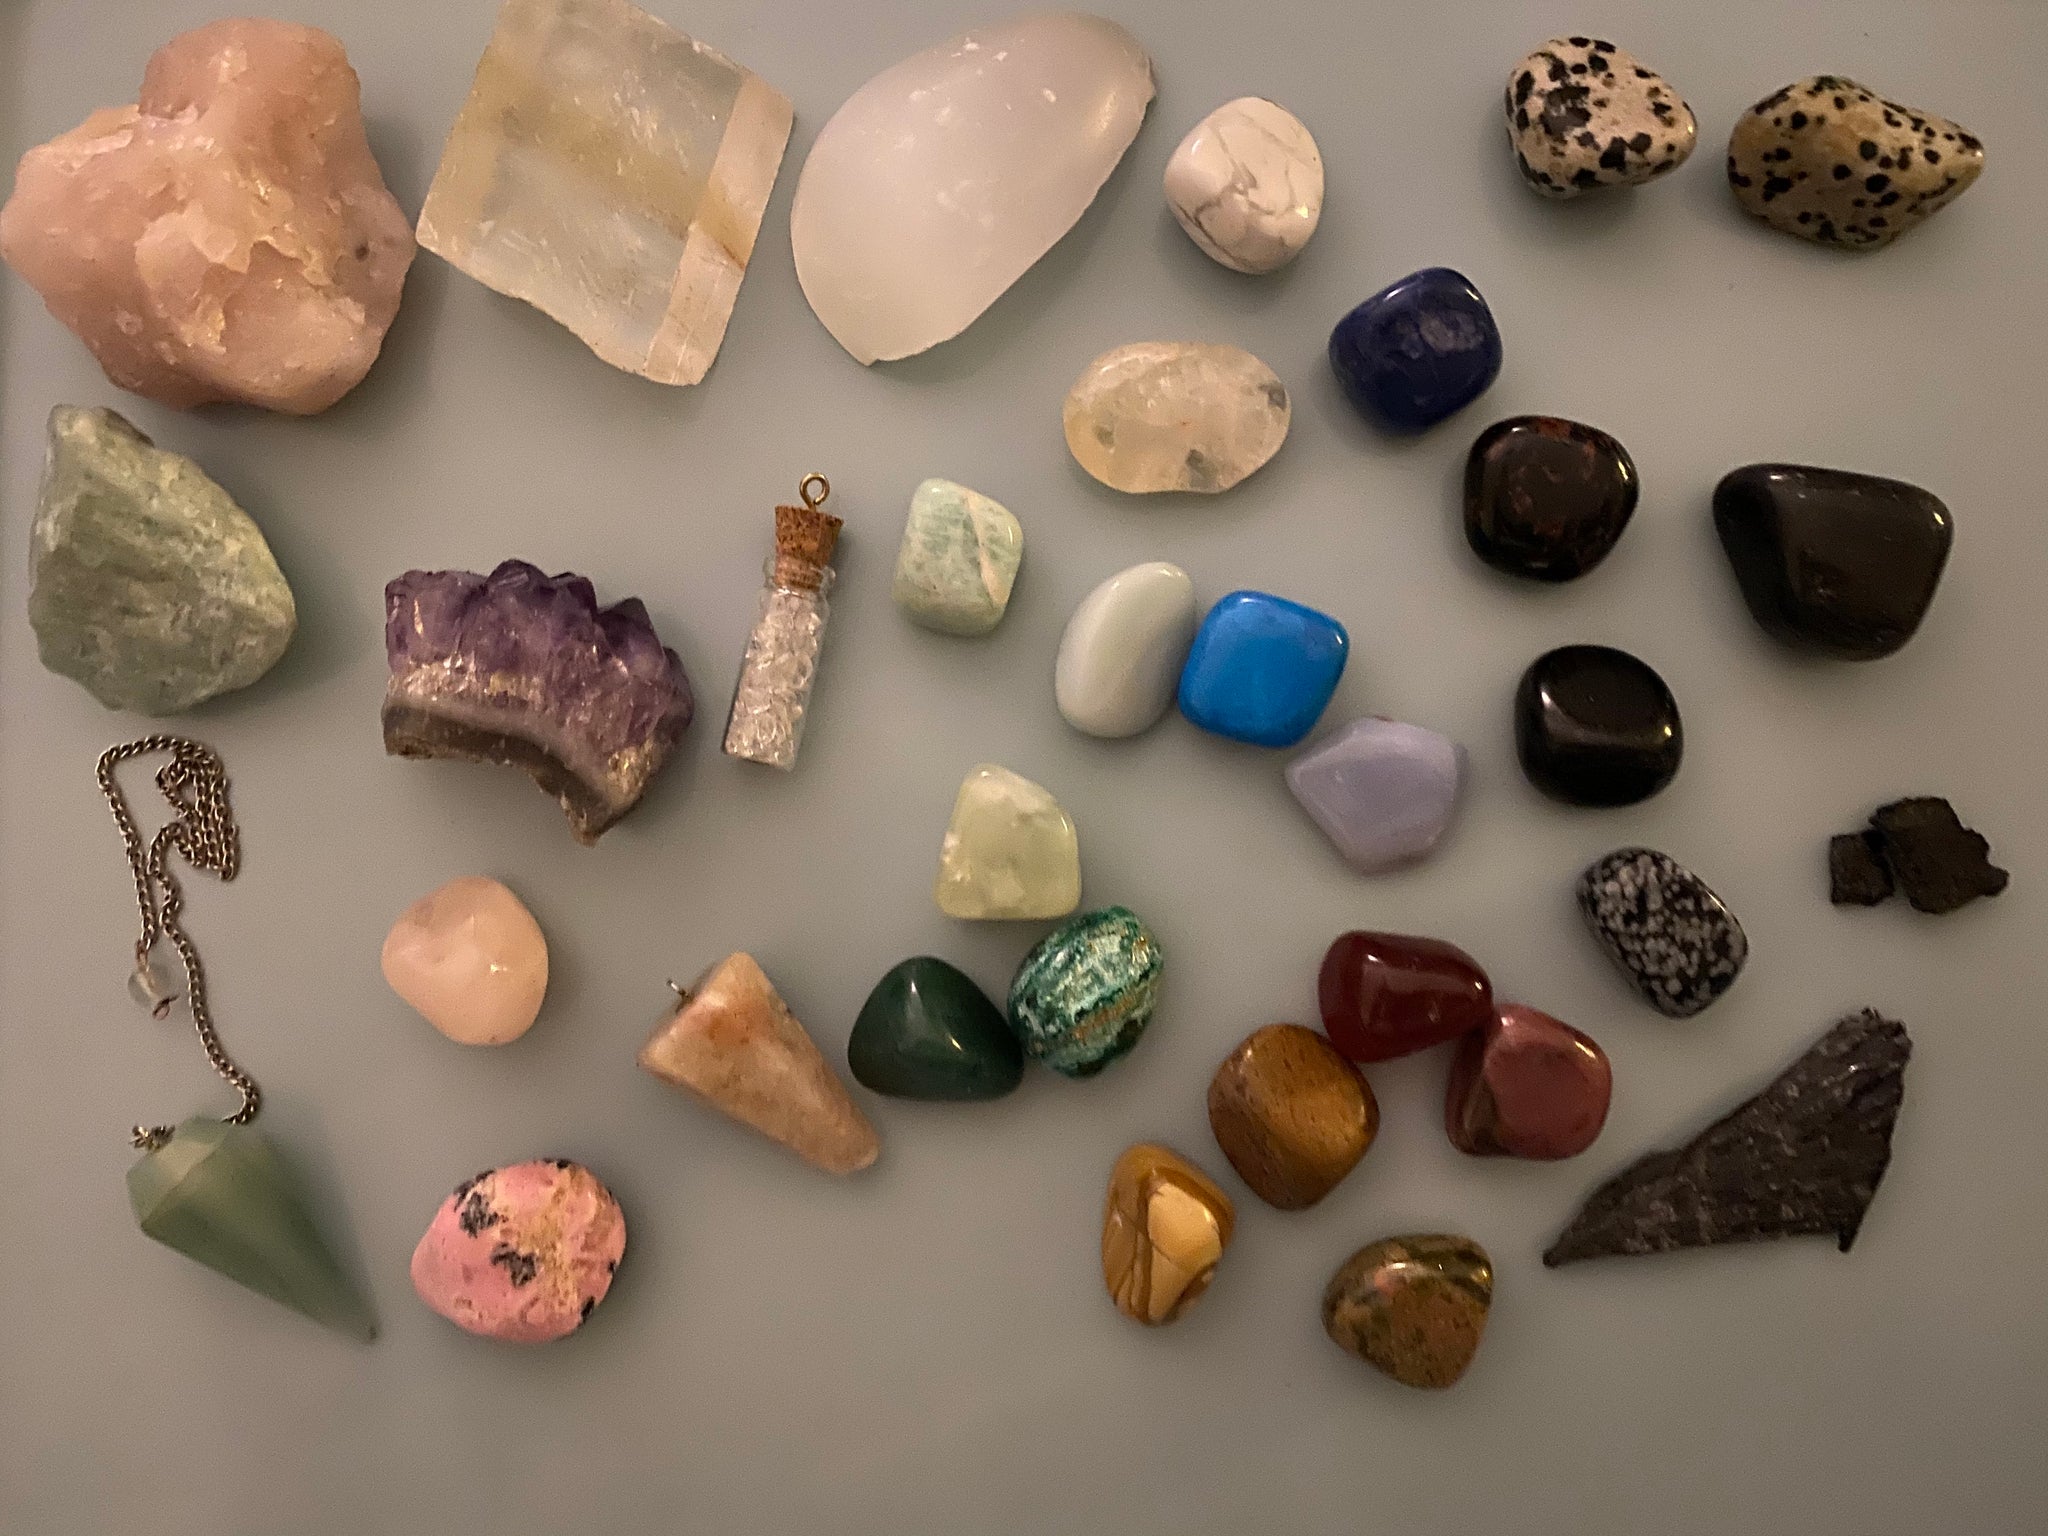 TOOL #20 HOW THIS TOOL LED ME TO A CRYSTAL HEALING DIPLOMA!